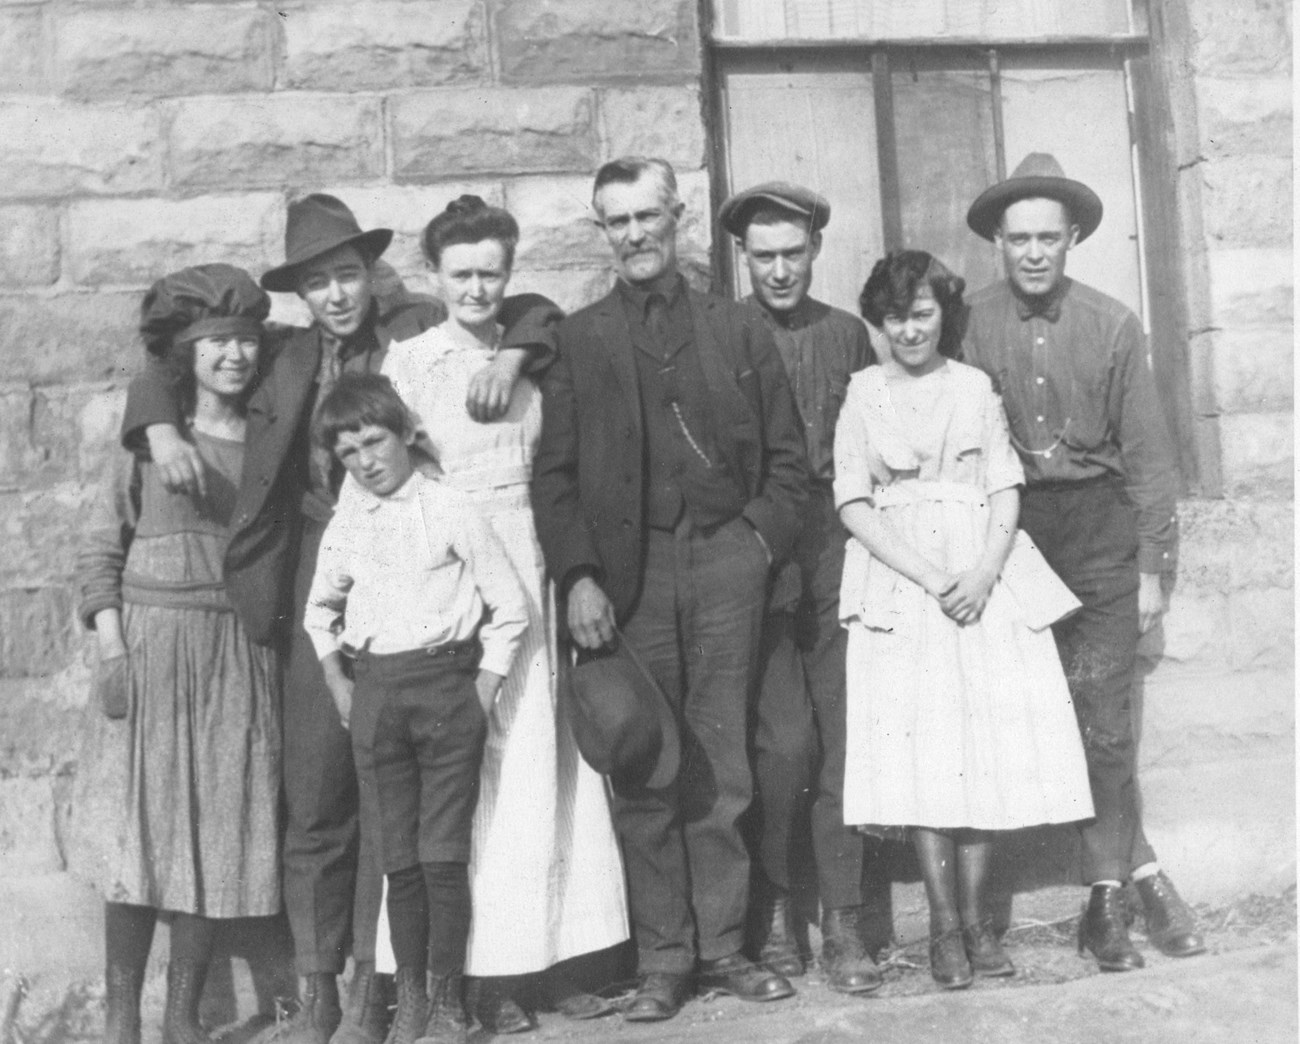 Historical family photo of the Wellington family in front of a building